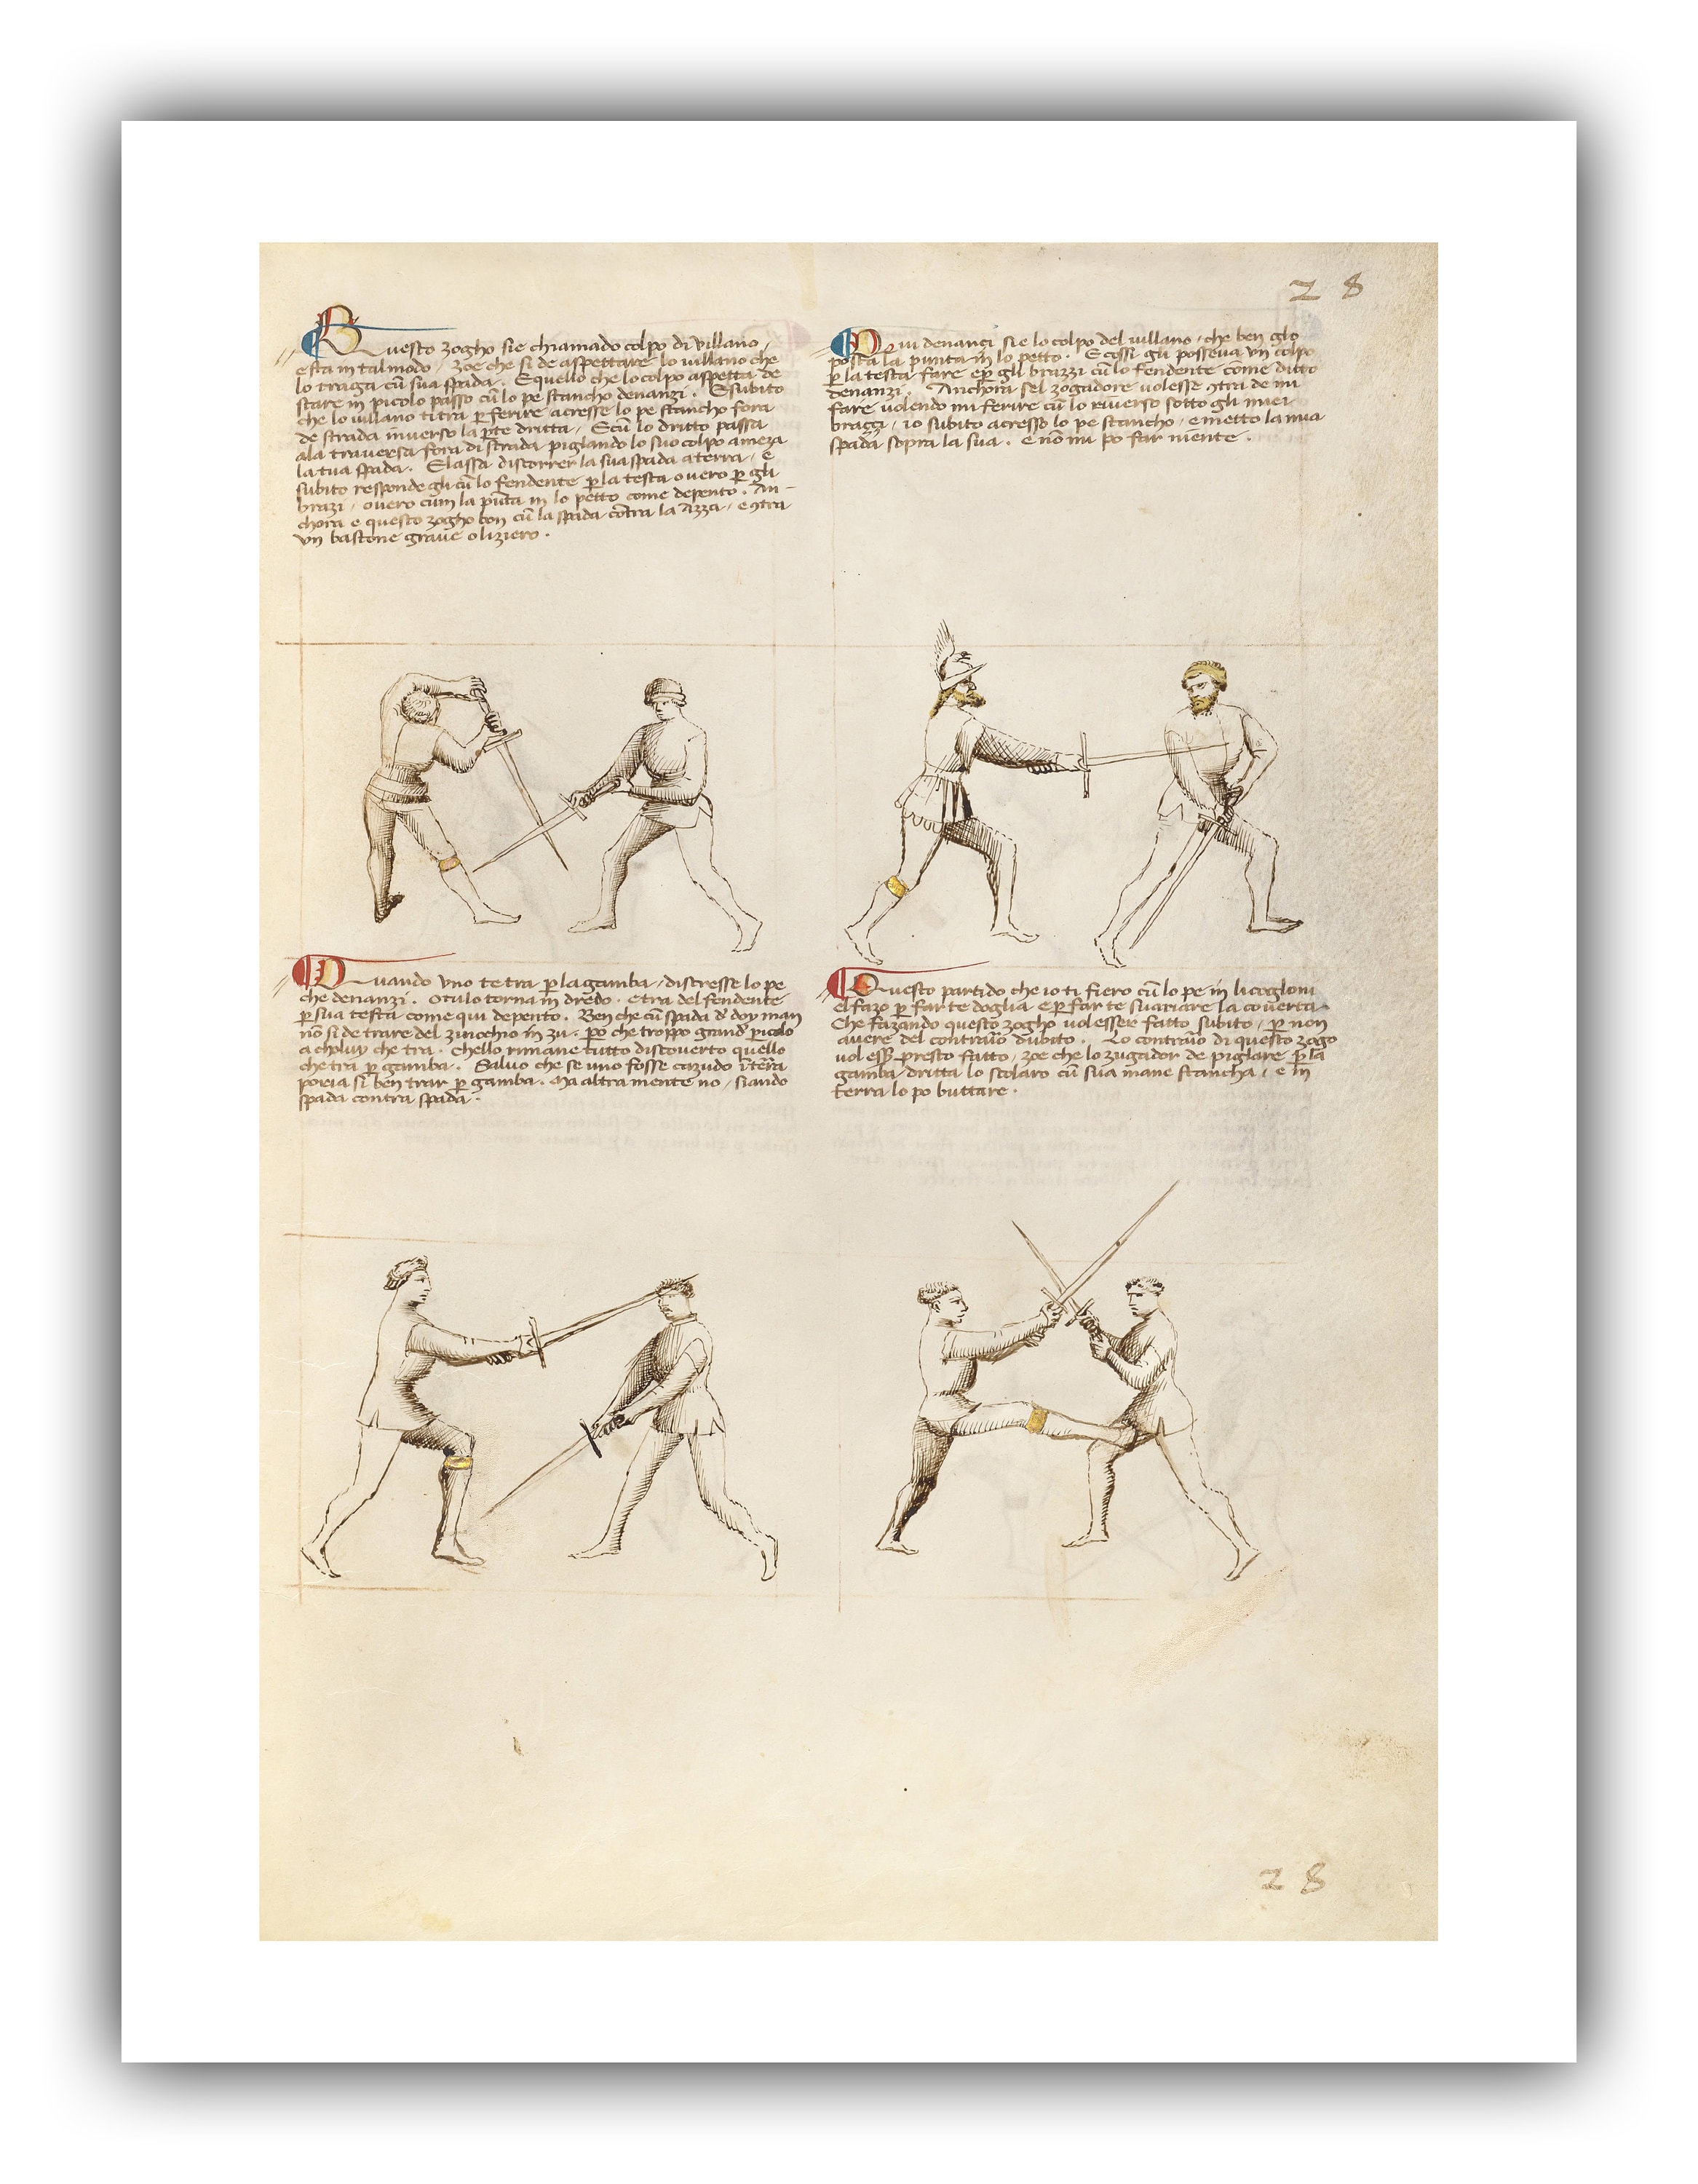 Www Baluo Video - Fiore Dei Liberi : Combat With Sword / Fencing fol. 26 the - Etsy Hong Kong